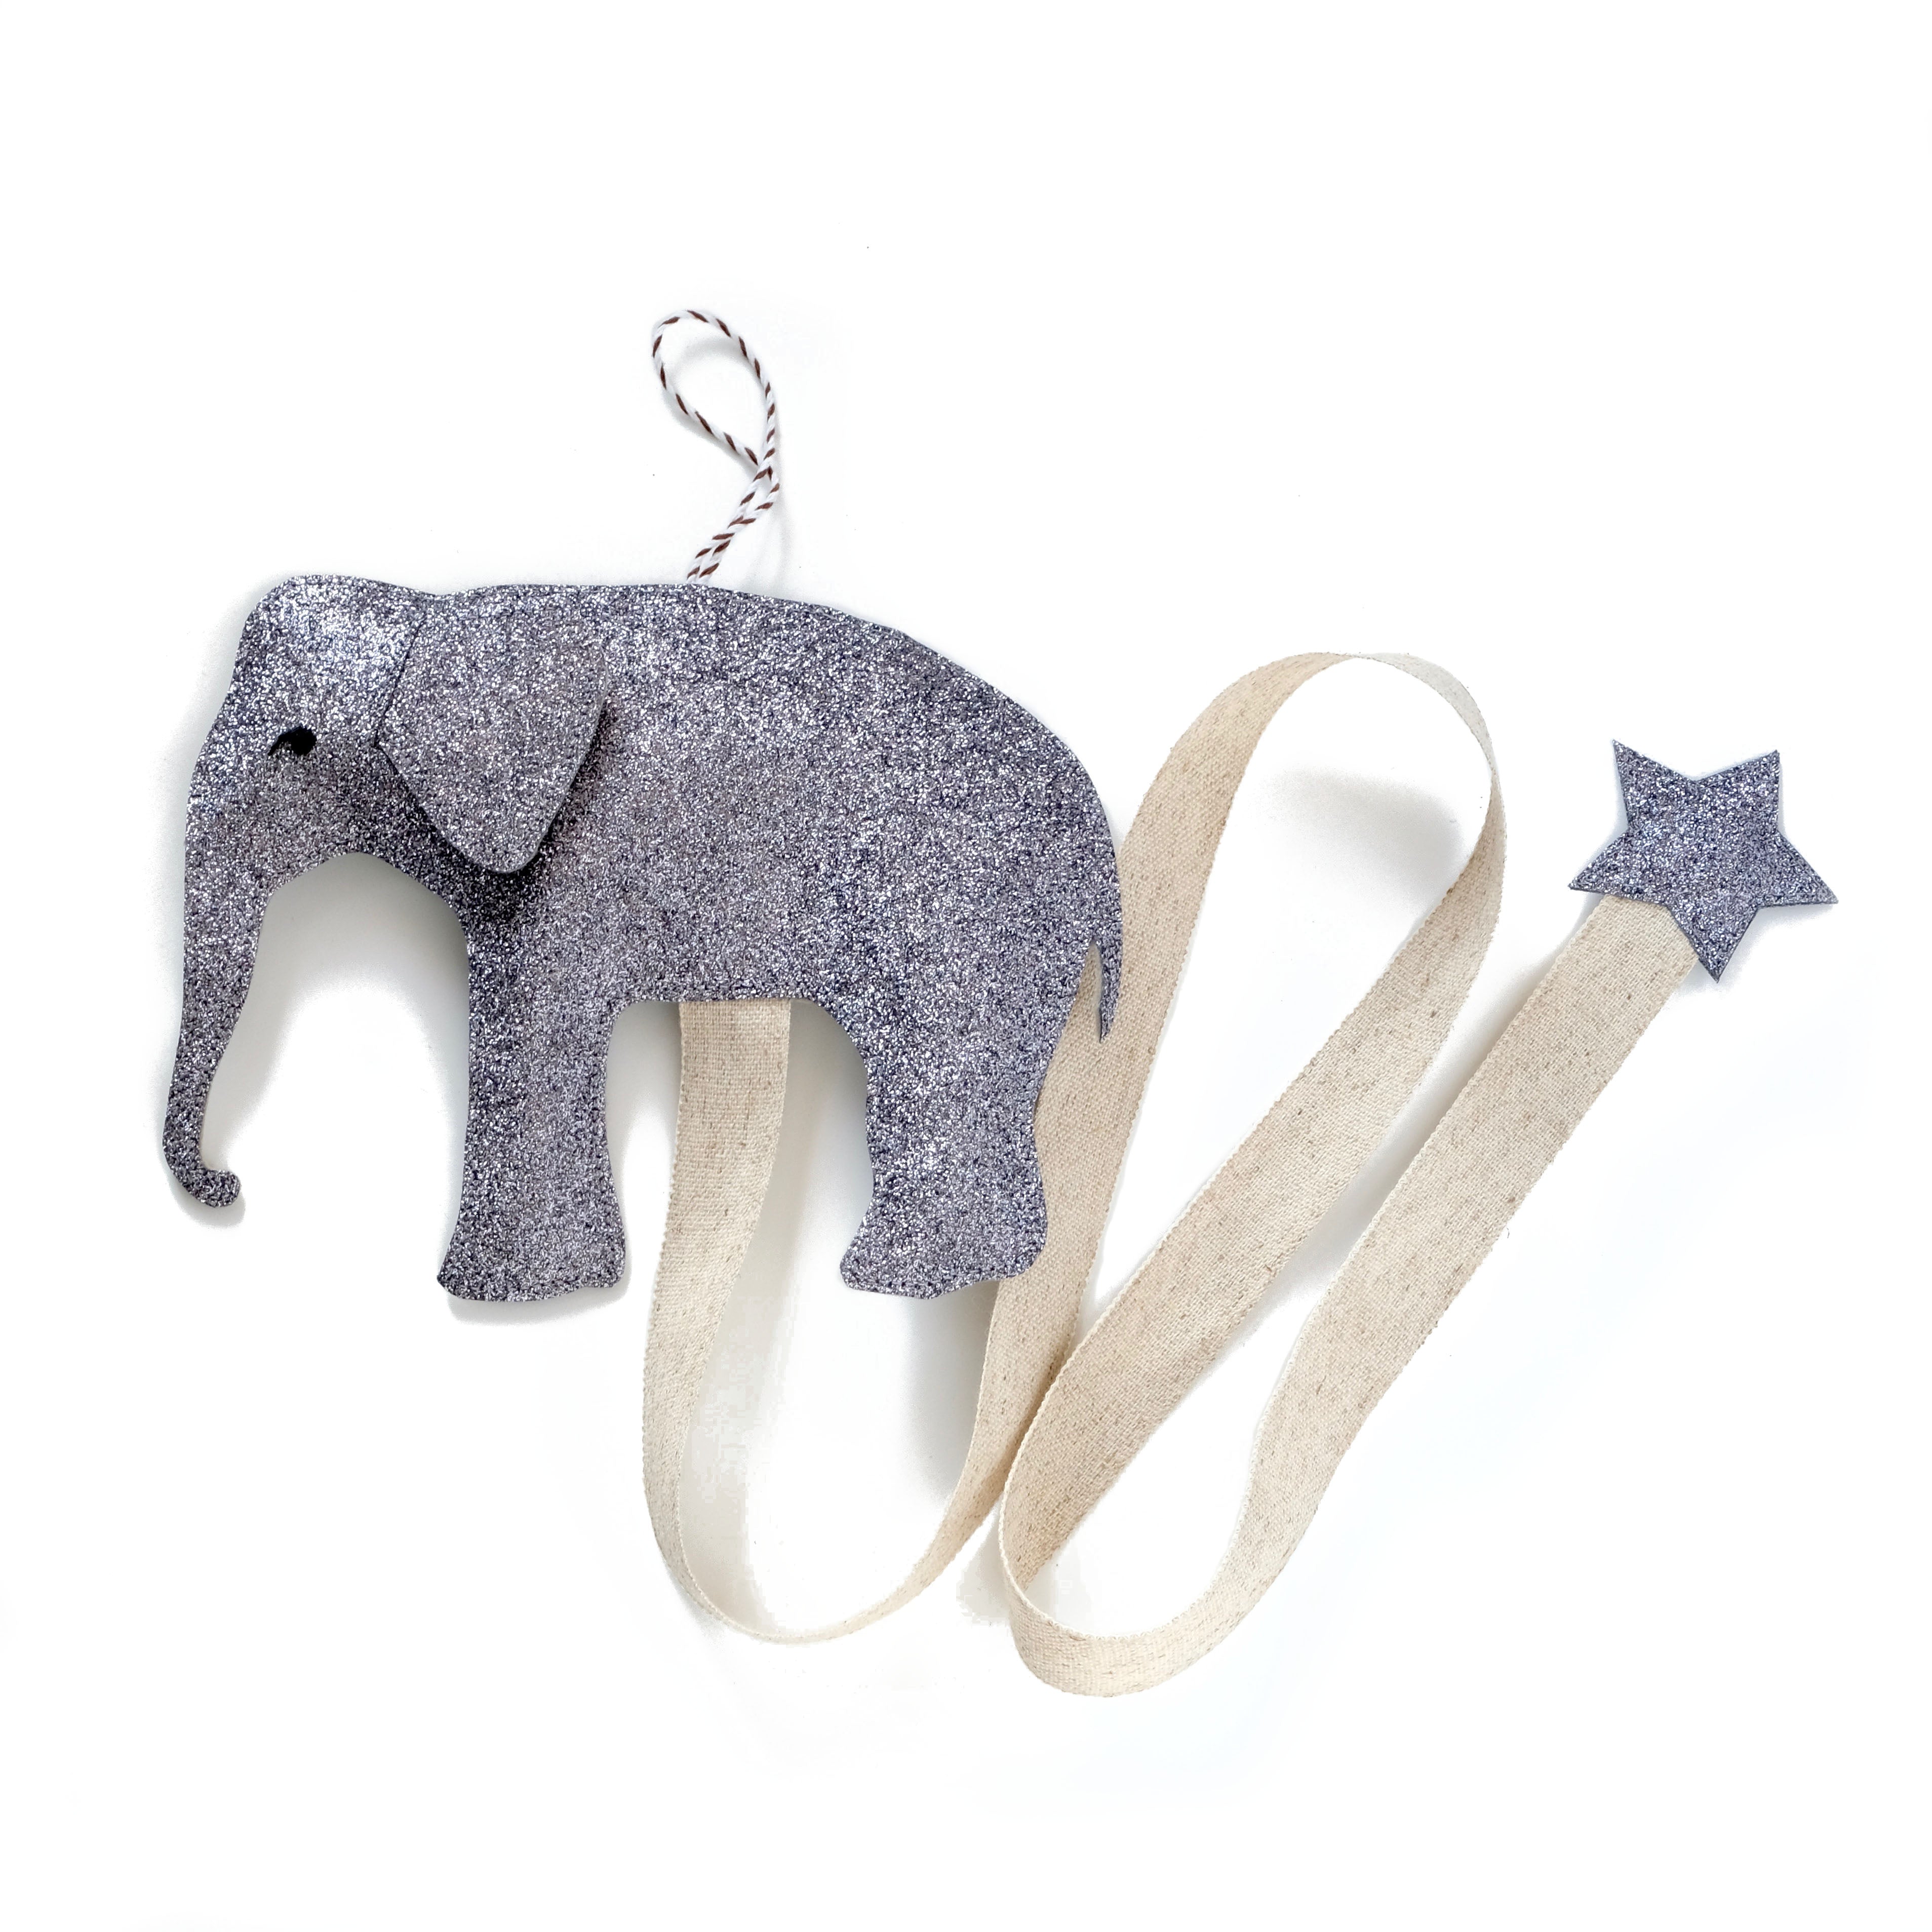 Grey elephant hair clip and bow holder unlike any other. 